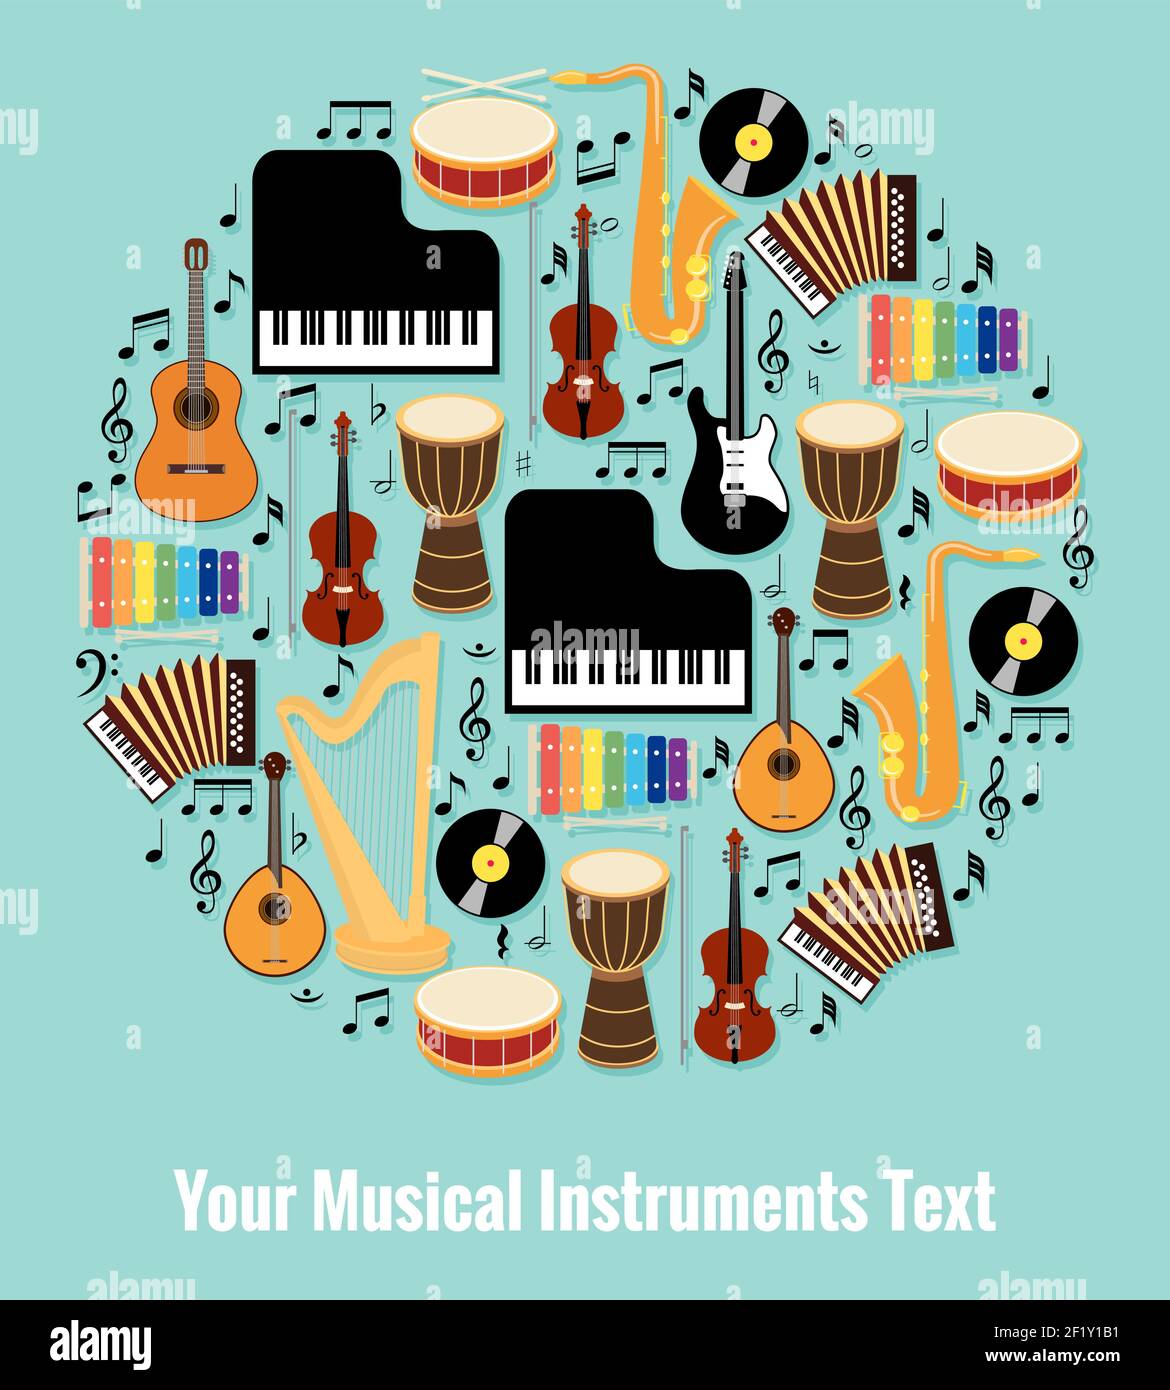 Assorted Musical Instruments Design Formed Round with Editable Text Area. Isolated on Light Blue Sky Background. Stock Vector